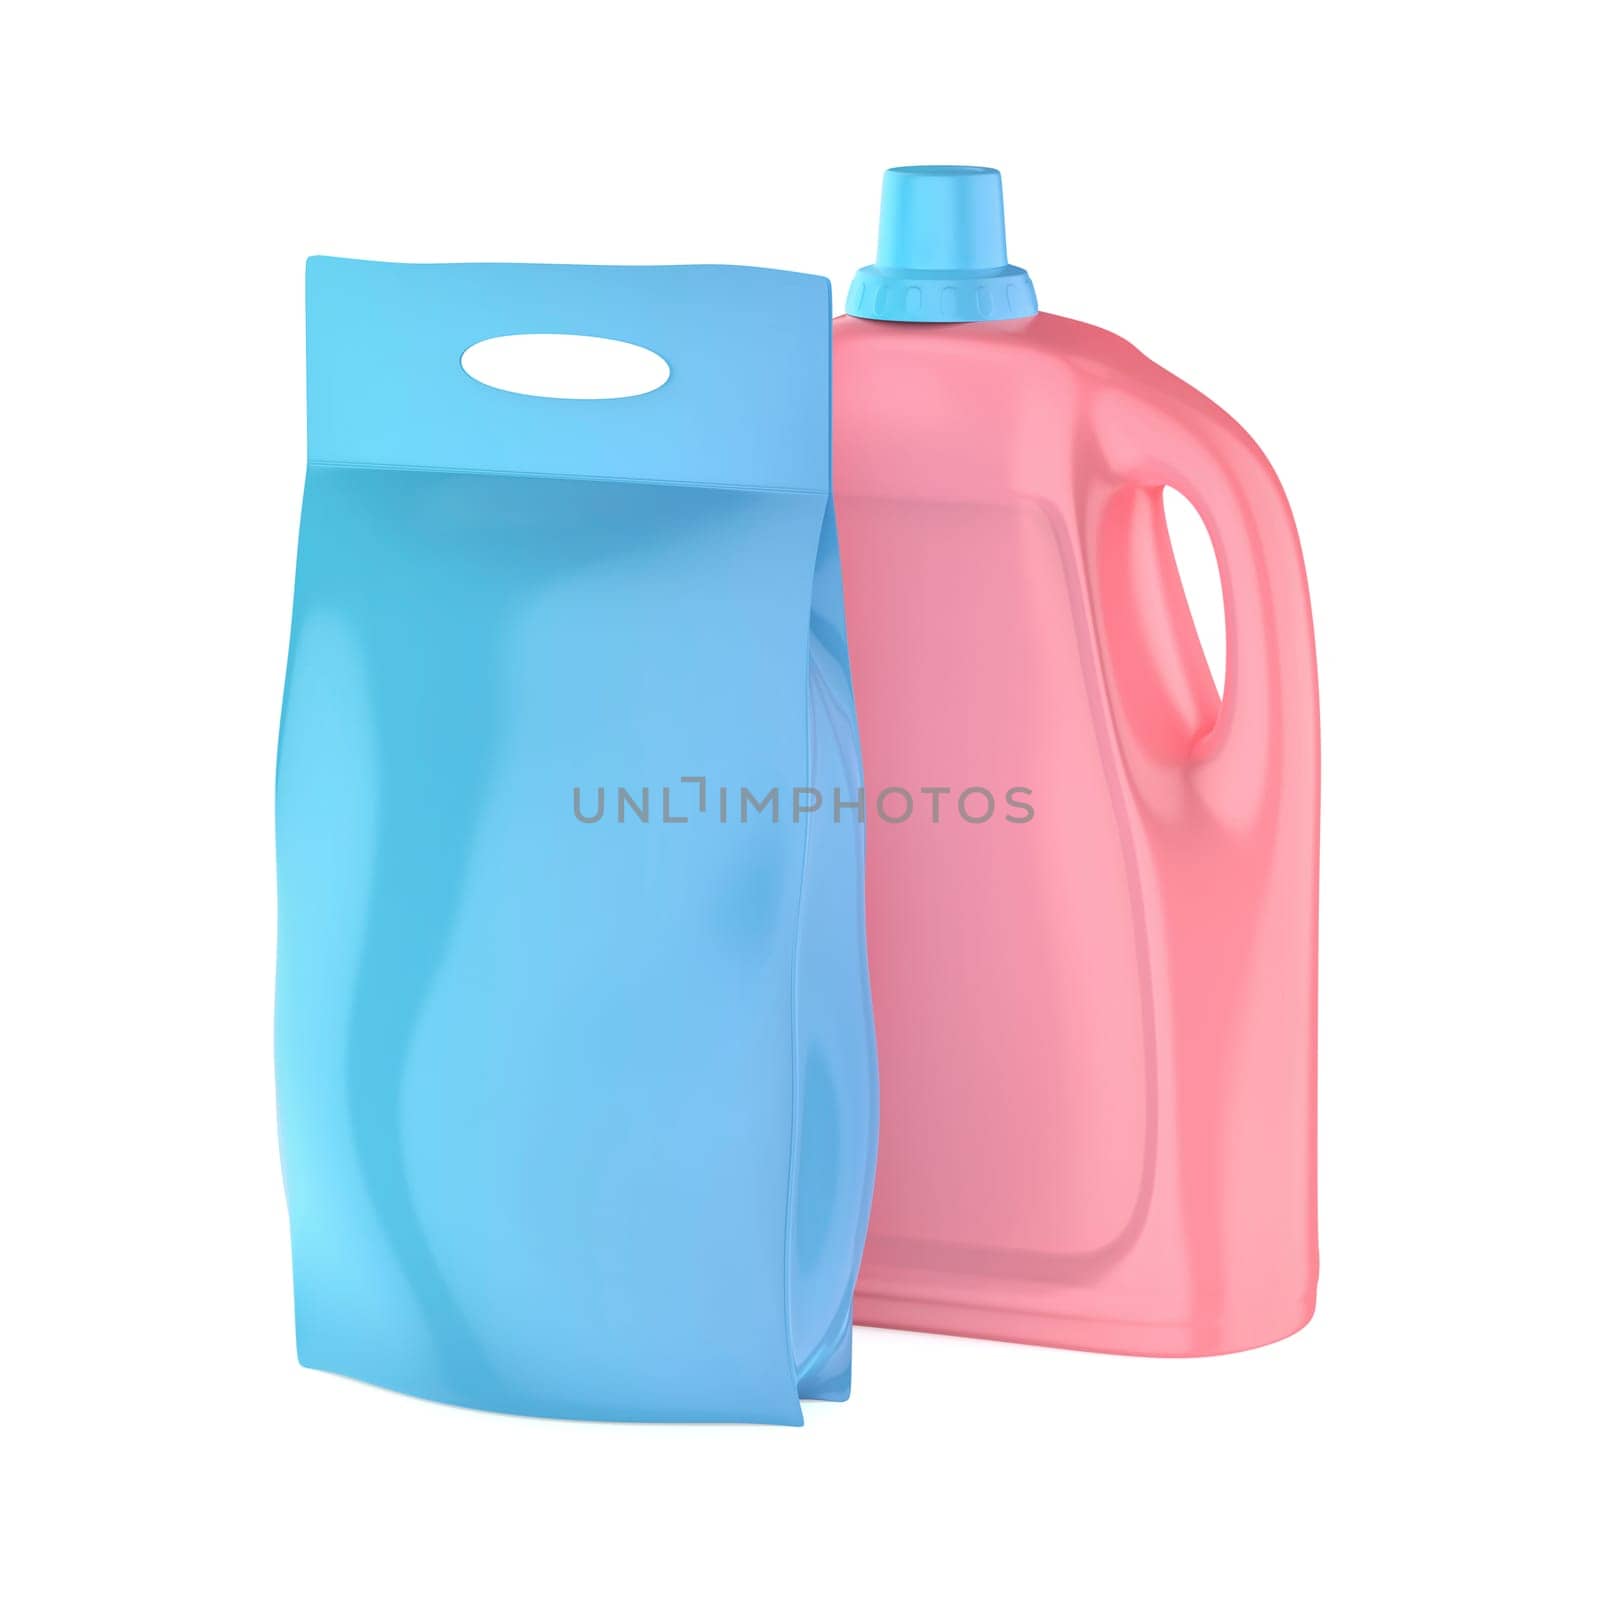 Liquid detergent bottle and washing powder bag by magraphics